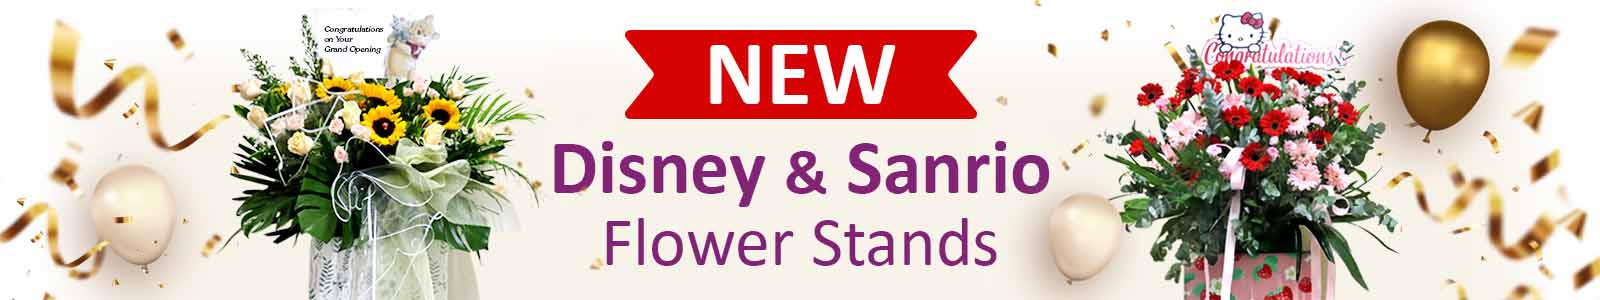 NEW Disney & Sanrio Flower Stands! Perfect for Grand Openings and even Birthday Parties!